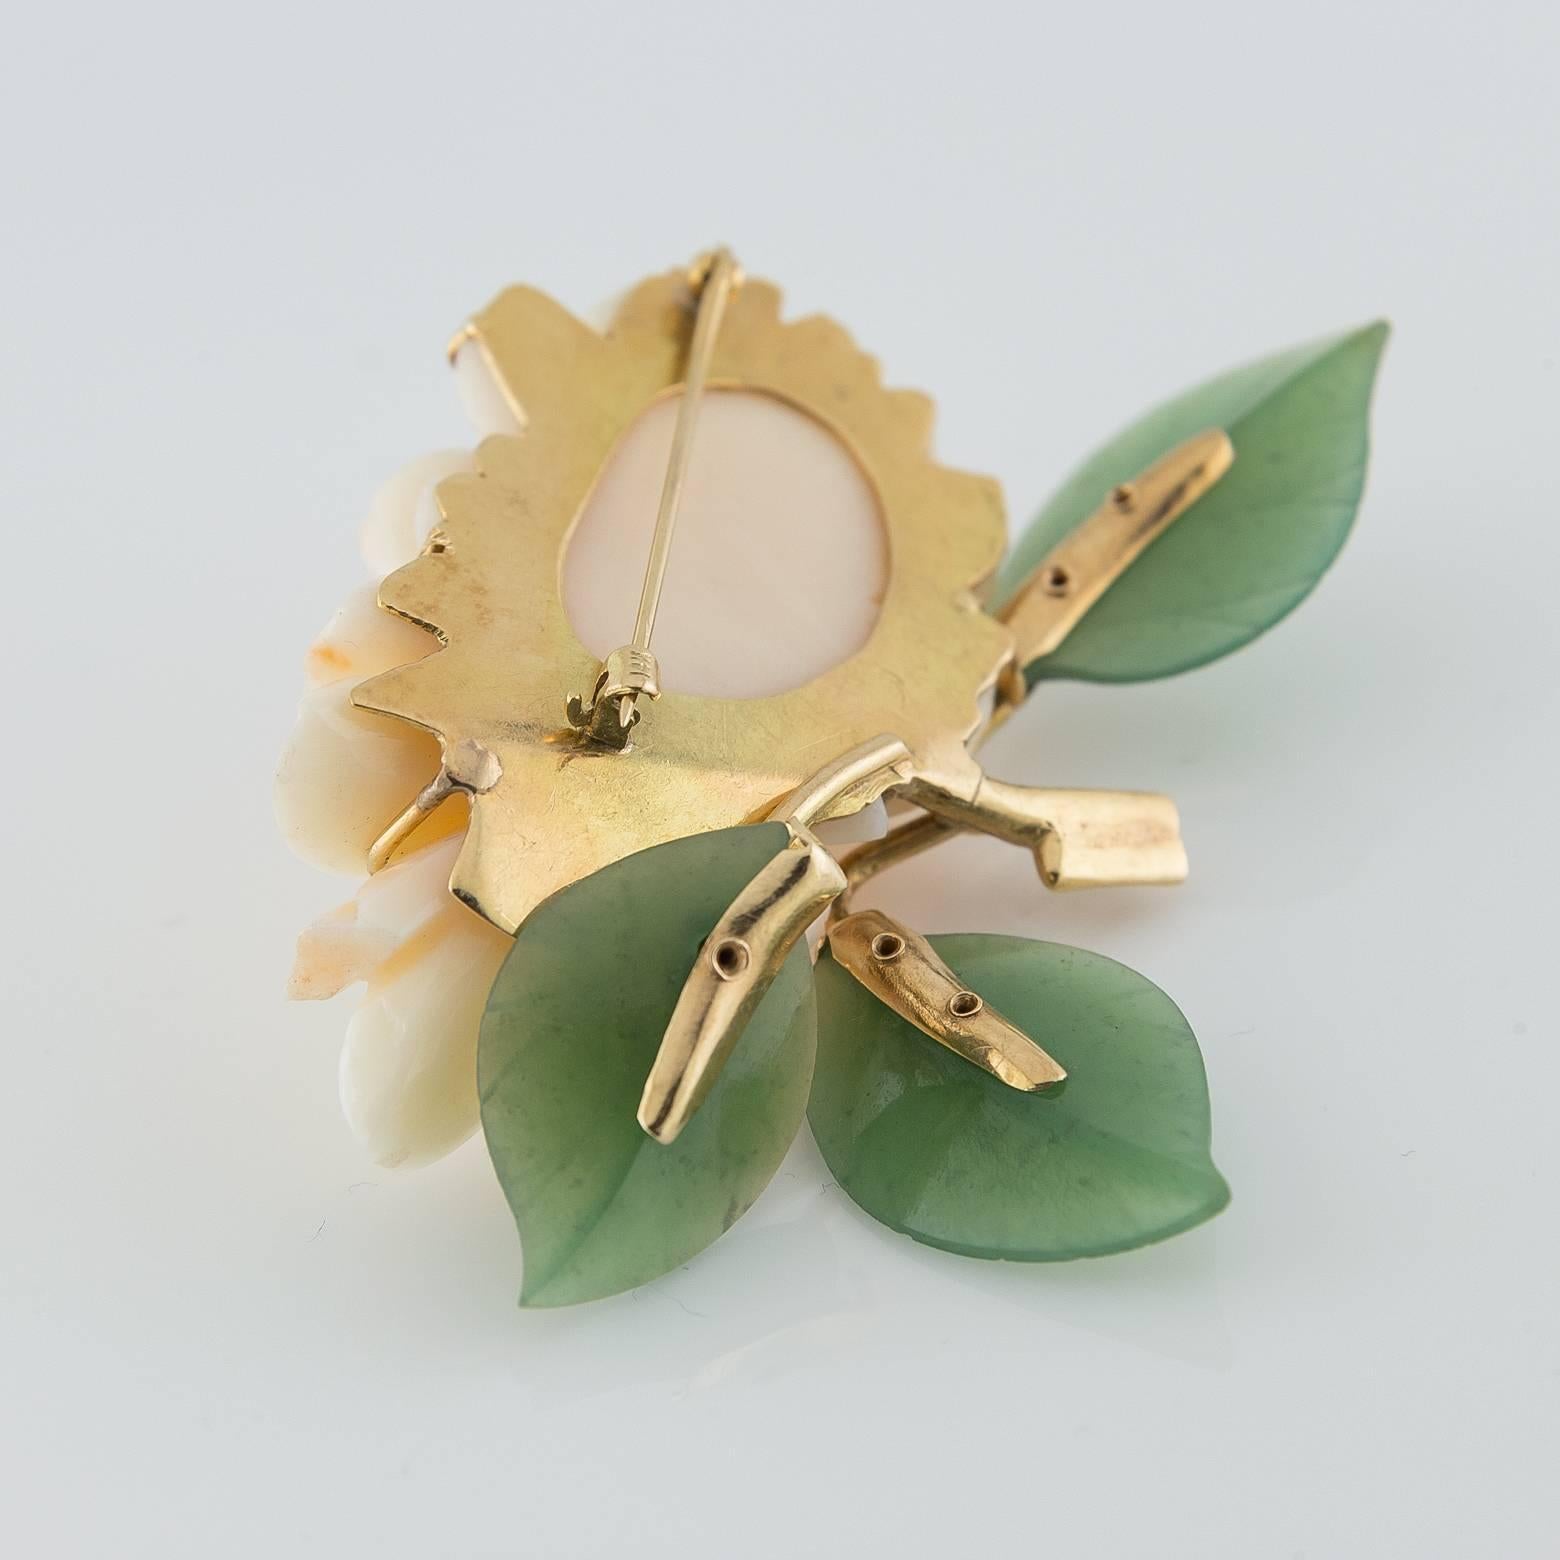 This stunning, soft and elegant pin in of the finest quality and has a delicate innocence about it. The color of the flower is a light ivory with a hint of peach on the larger petals. The branches are artfully sculpted out of 14k gold. 